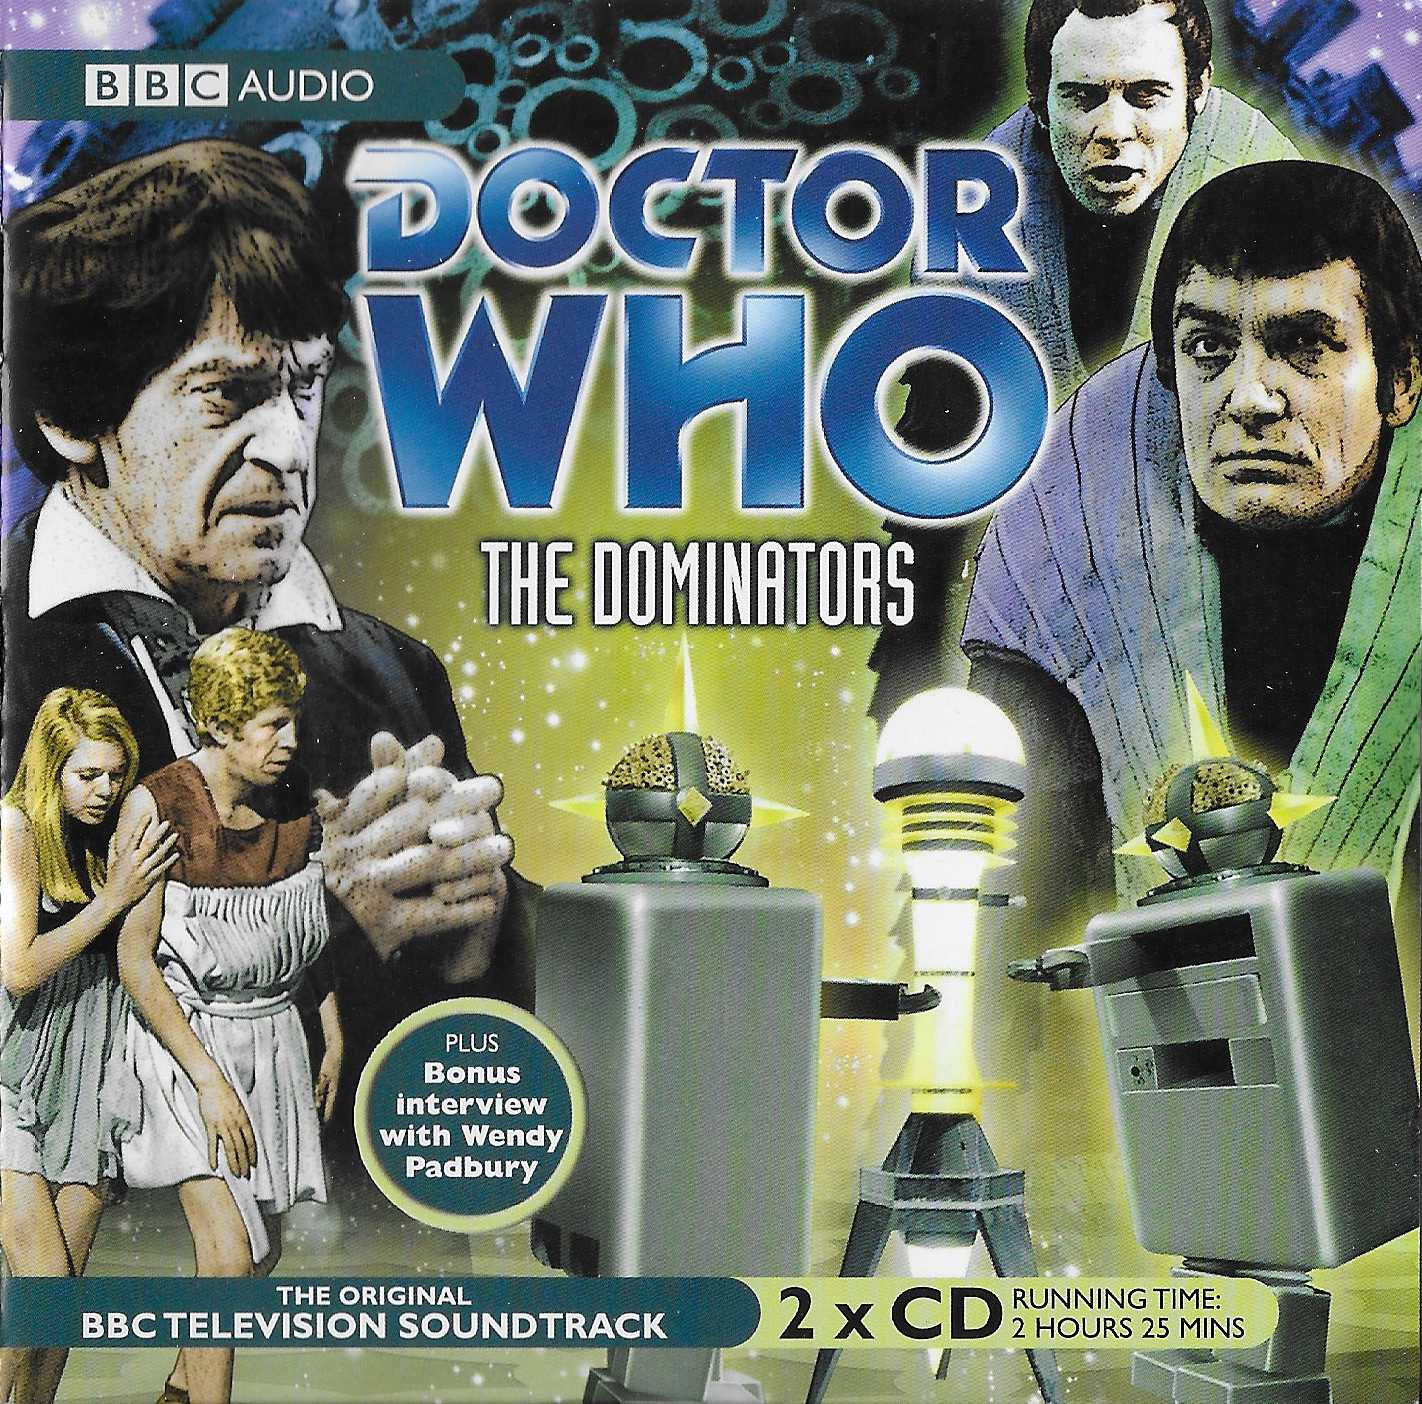 Picture of ISBN 978-1-405-67759-2 Doctor Who - The Dominators by artist Norman Ashby (Mervyn Haisman / Henry Lincoln) from the BBC cds - Records and Tapes library